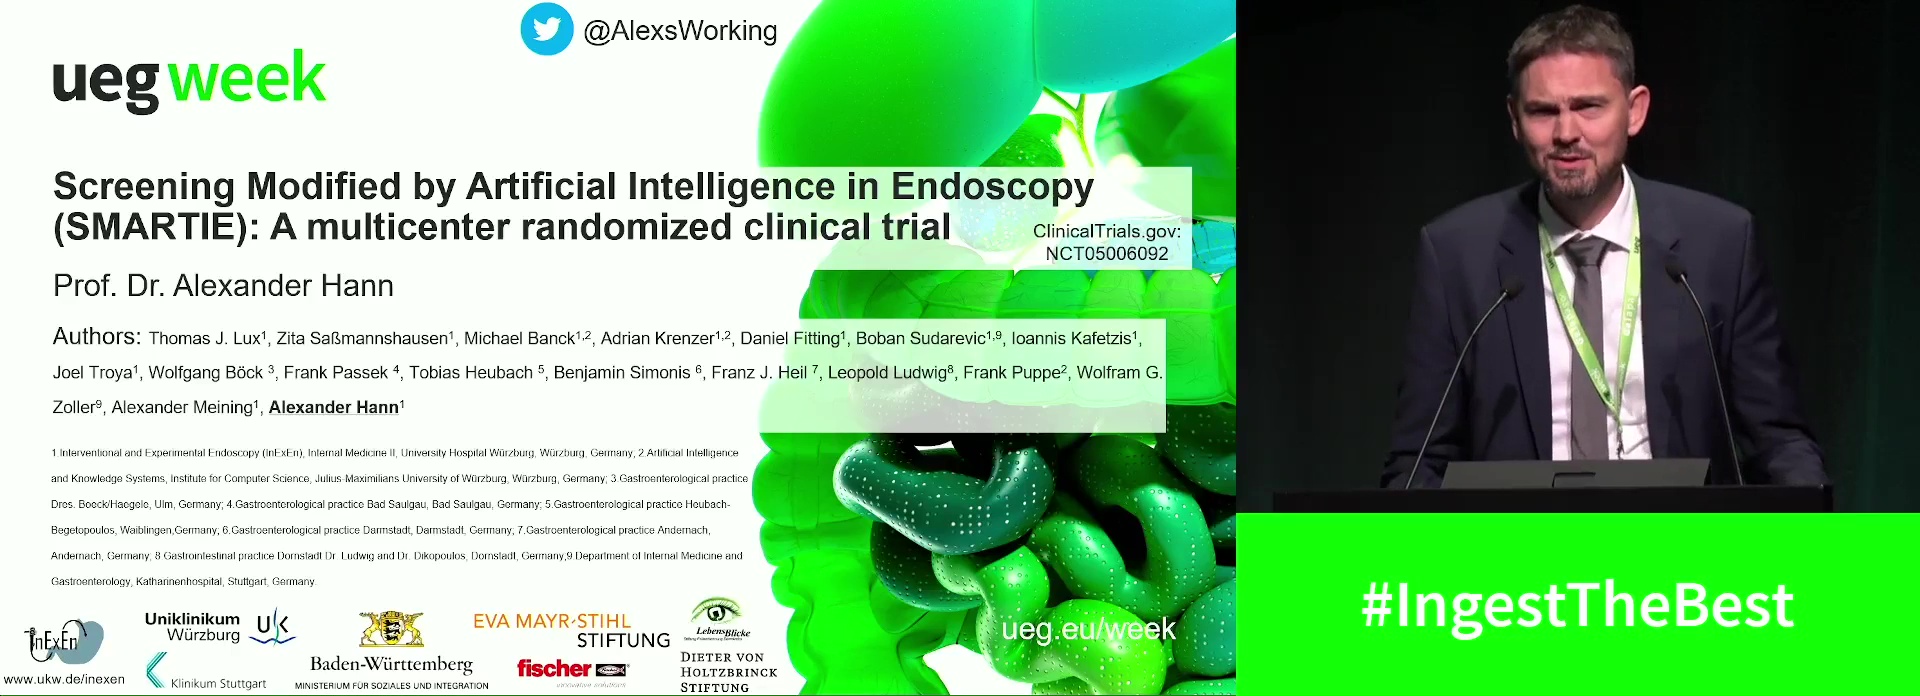 SCREENING MODIFIED BY ARTIFICIAL INTELLIGENCE IN ENDOSCOPY (SMARTIE): A MULTICENTER RANDOMIZED CLINICAL TRIAL